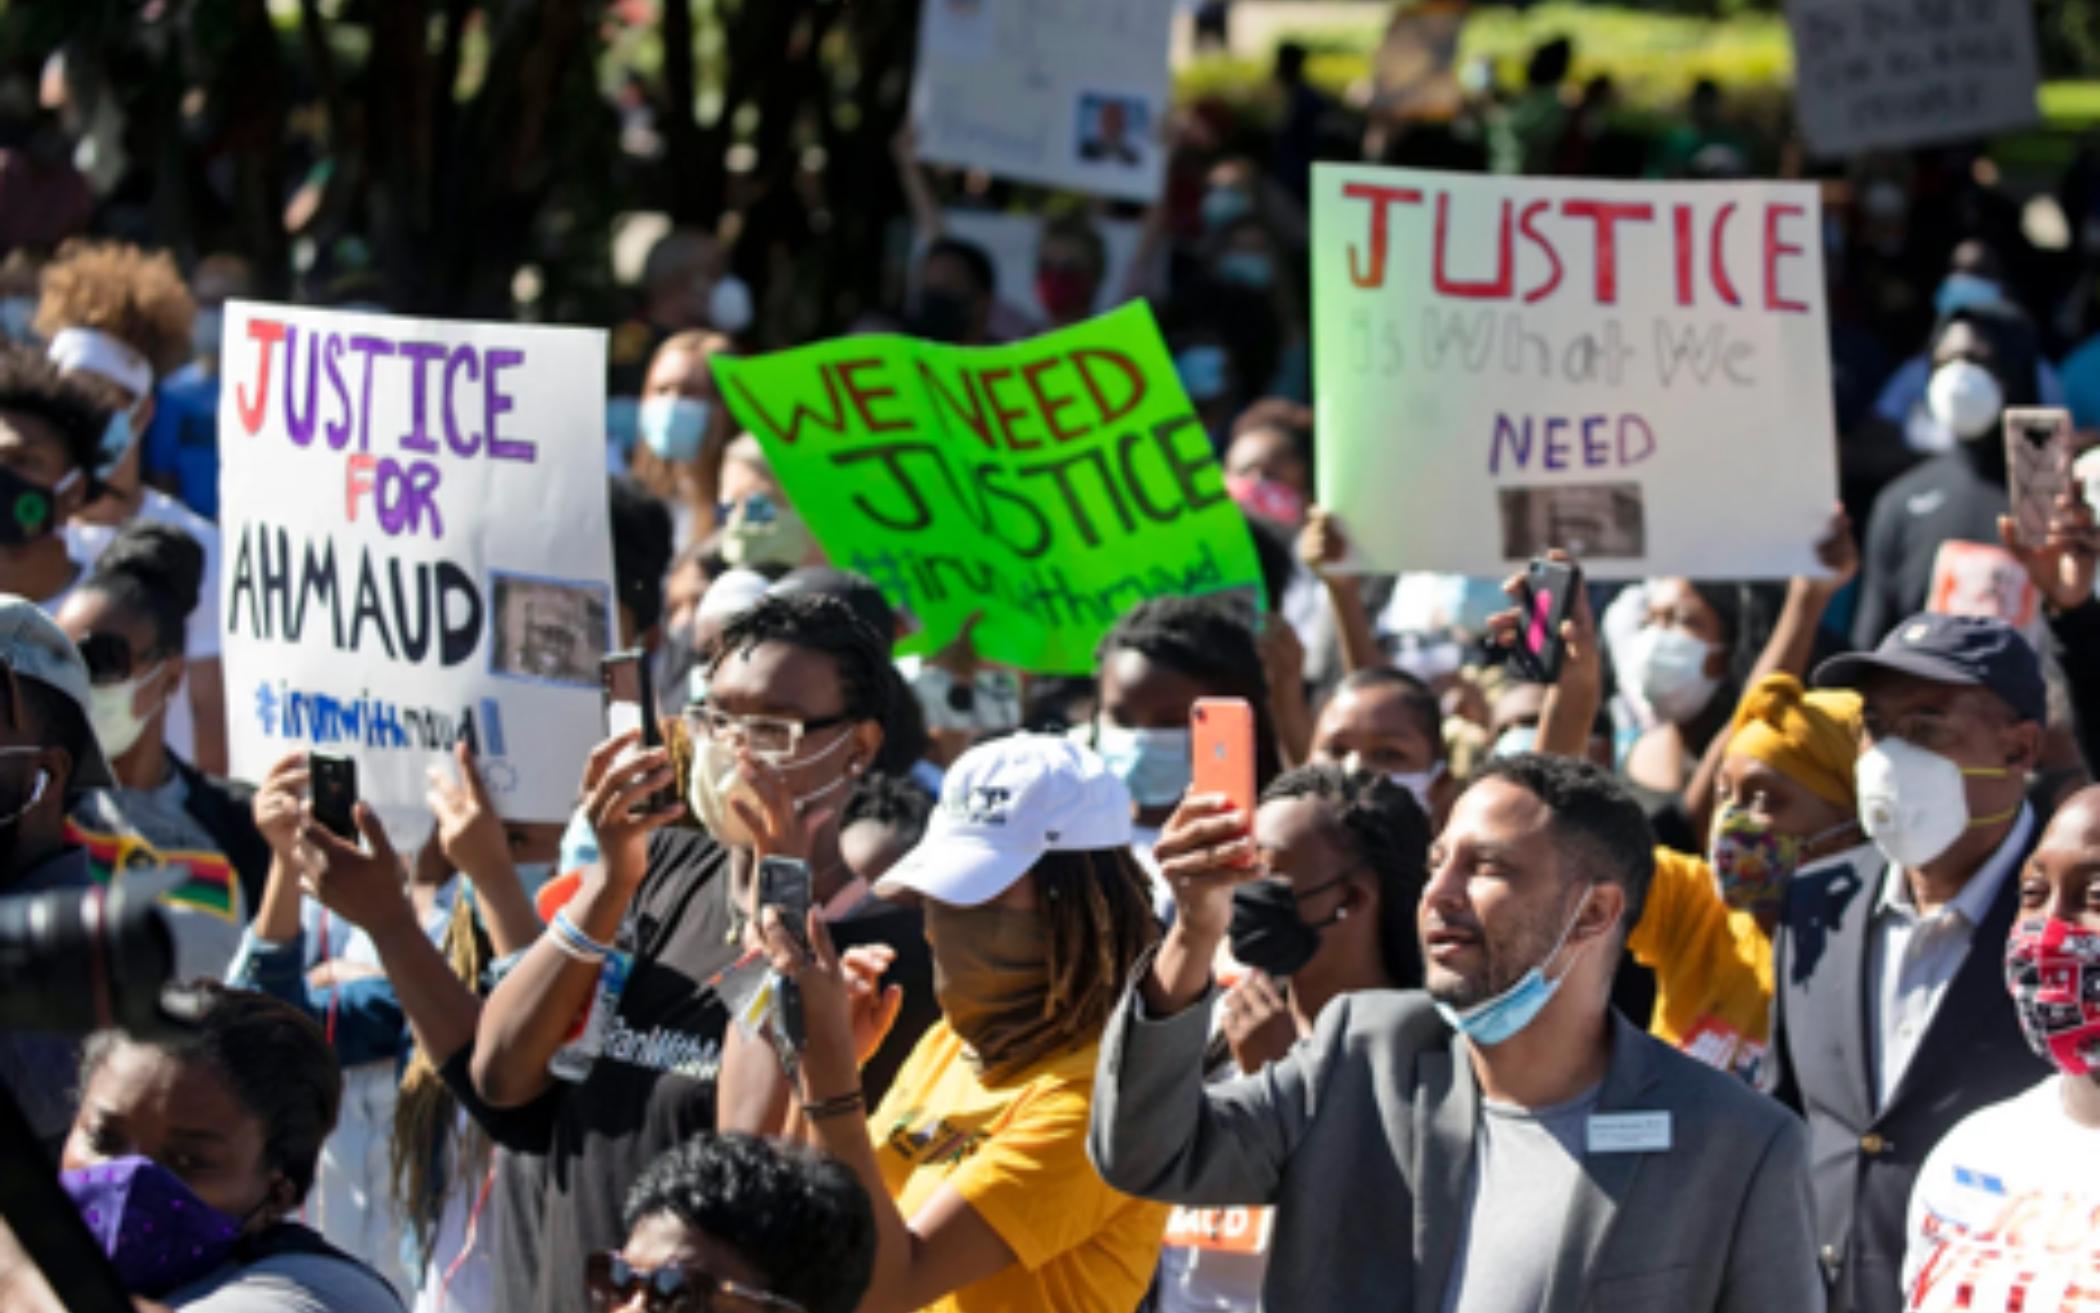 People participate in a rally May 8, 2020, in Brunswick, Georgia, to protest the killing of Ahmaud Arbery, an unarmed black man. Two men have been charged with murder in the February shooting death of Arbery, whom they had pursued in a truck after spotting him running in their neighborhood. 